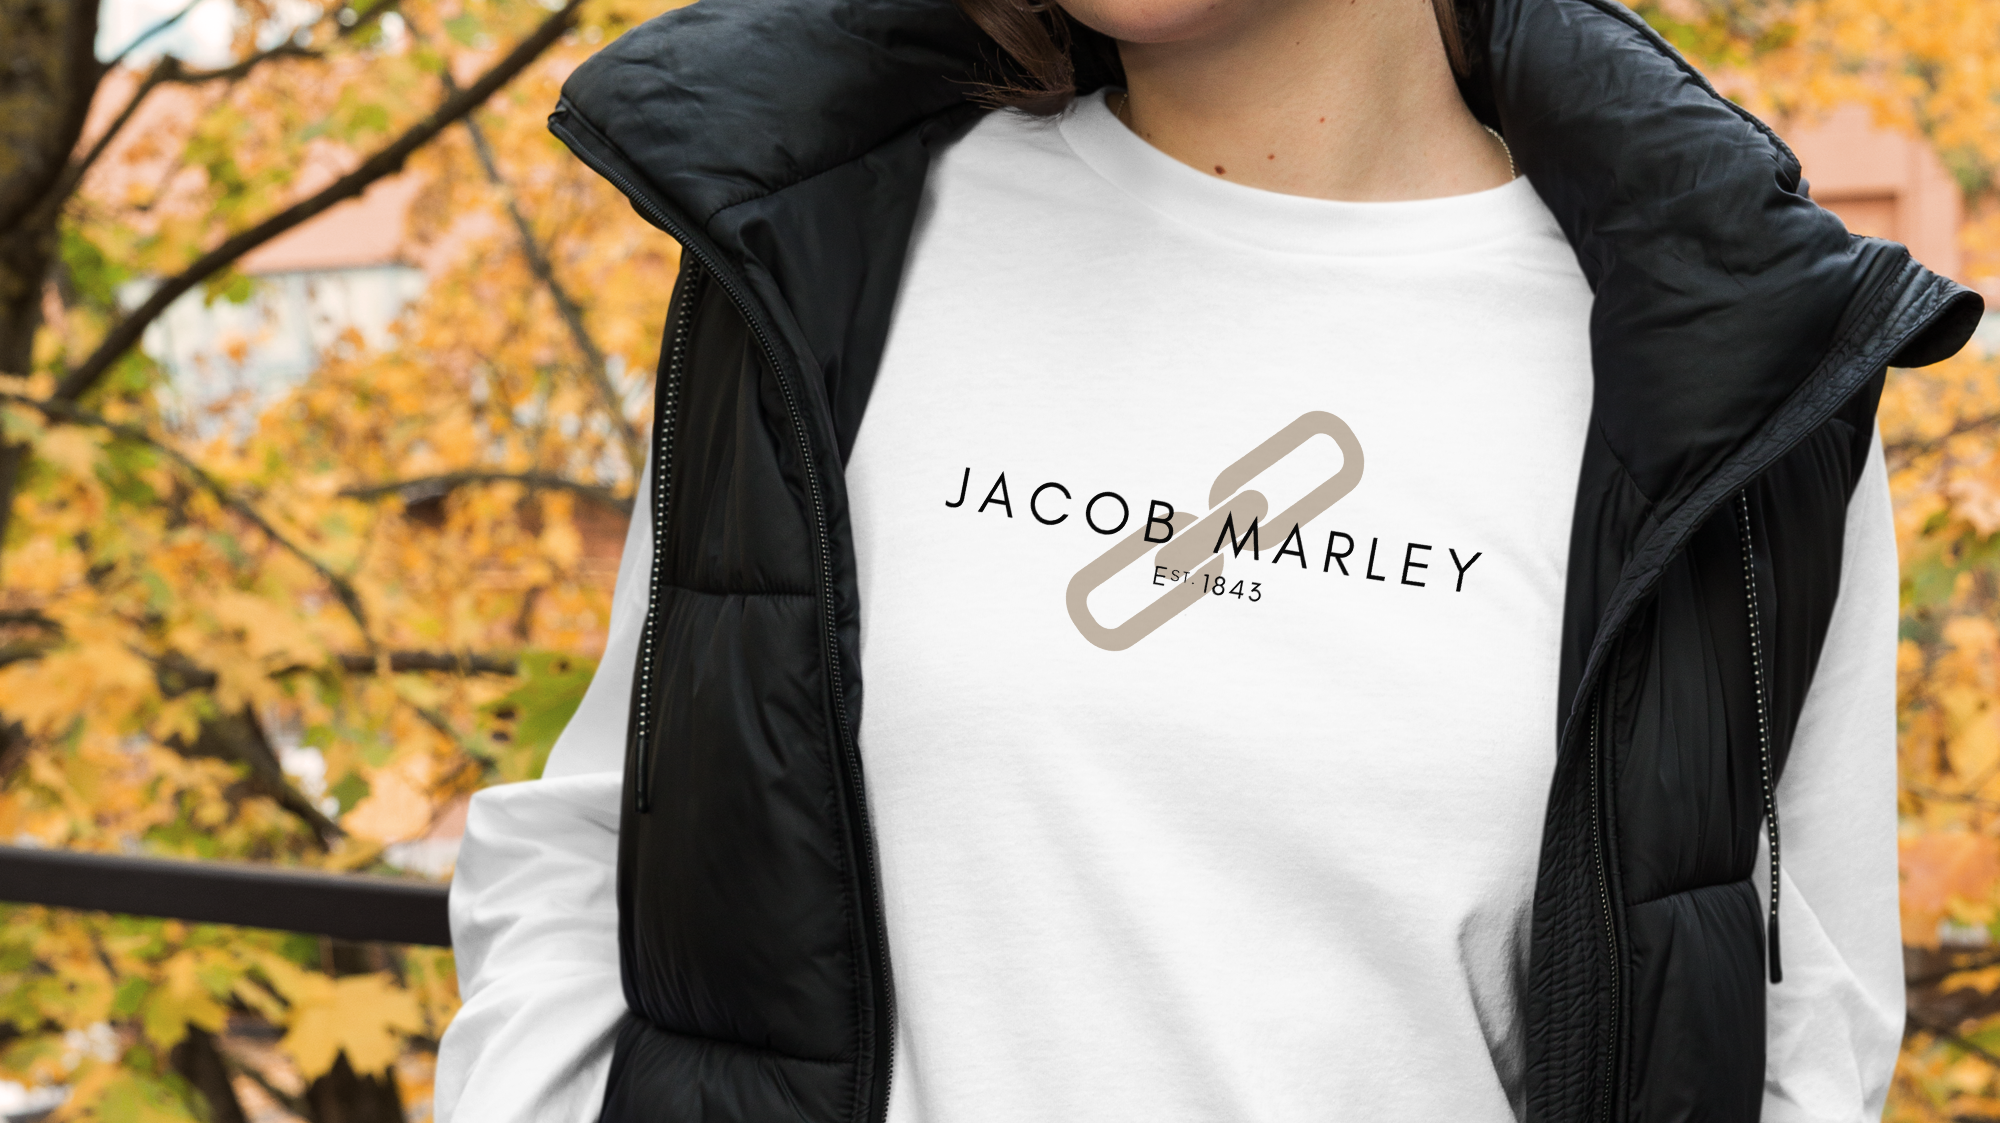 Introducing Jacob Marley: Pioneer of Chain Style